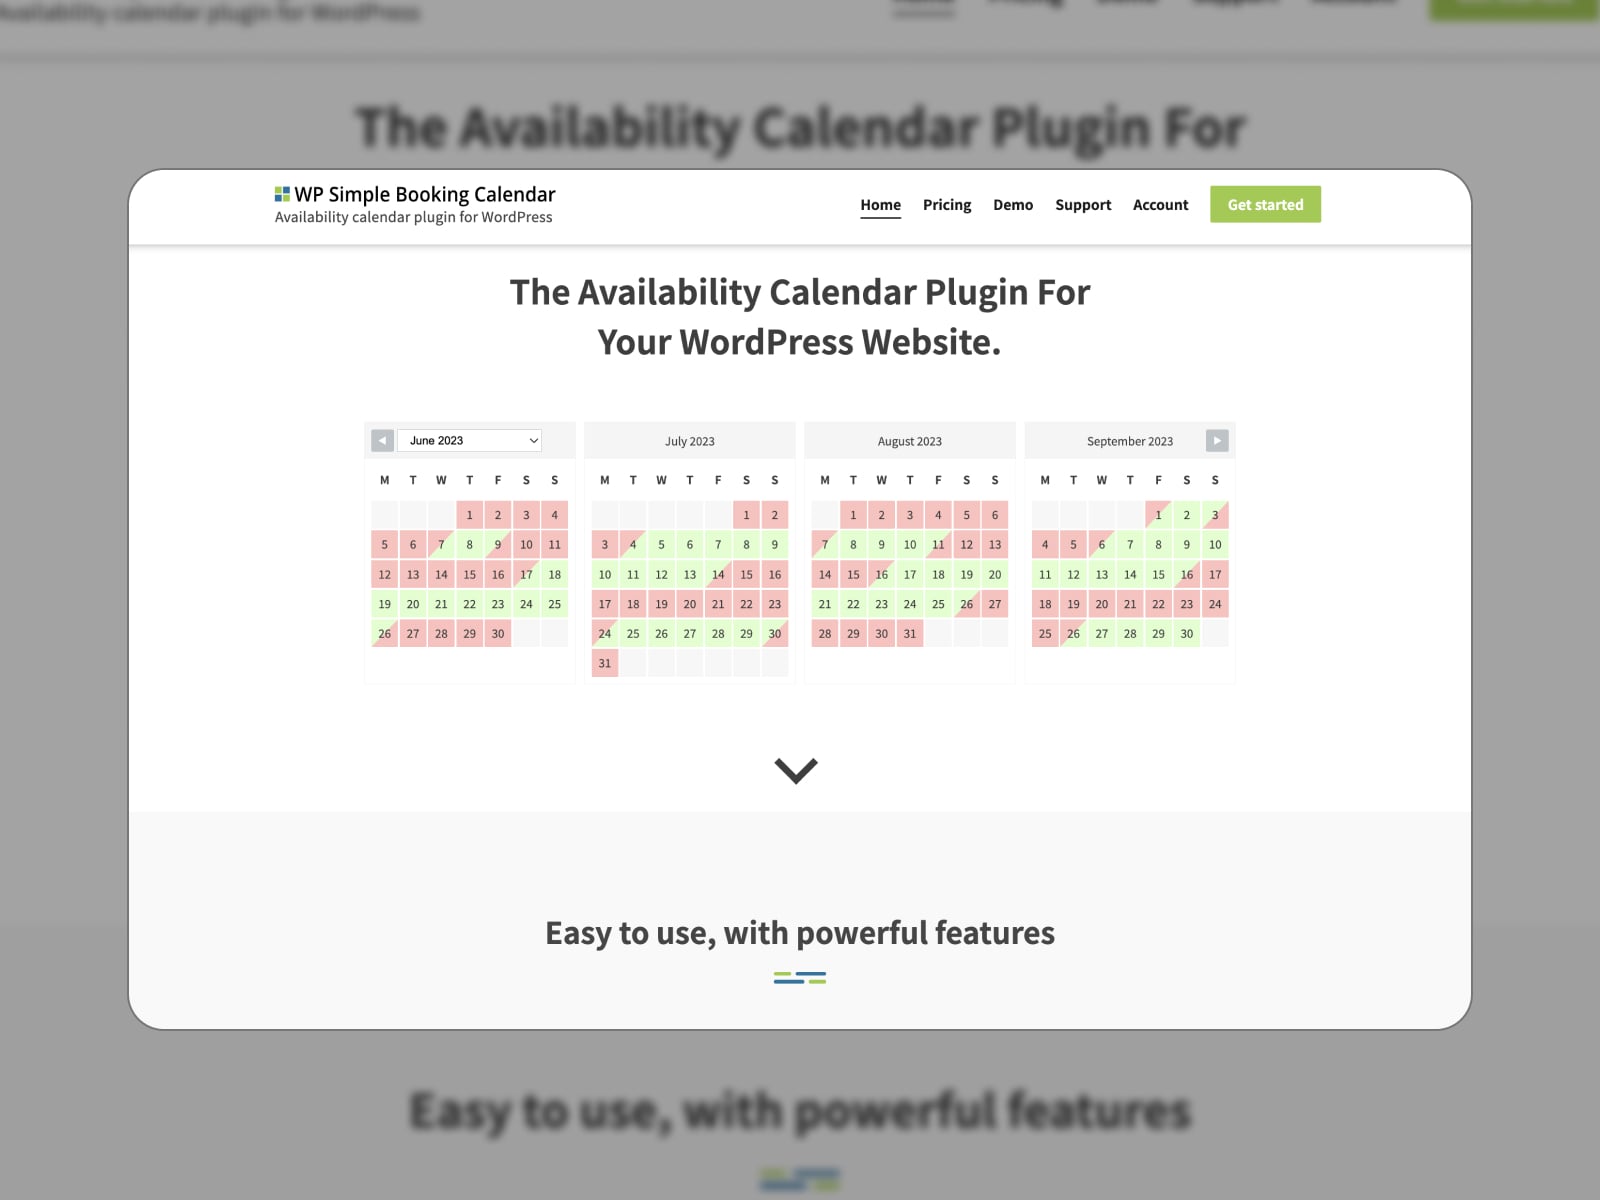 An example of the color-coded calendar in WP Simple Booking Calendar.